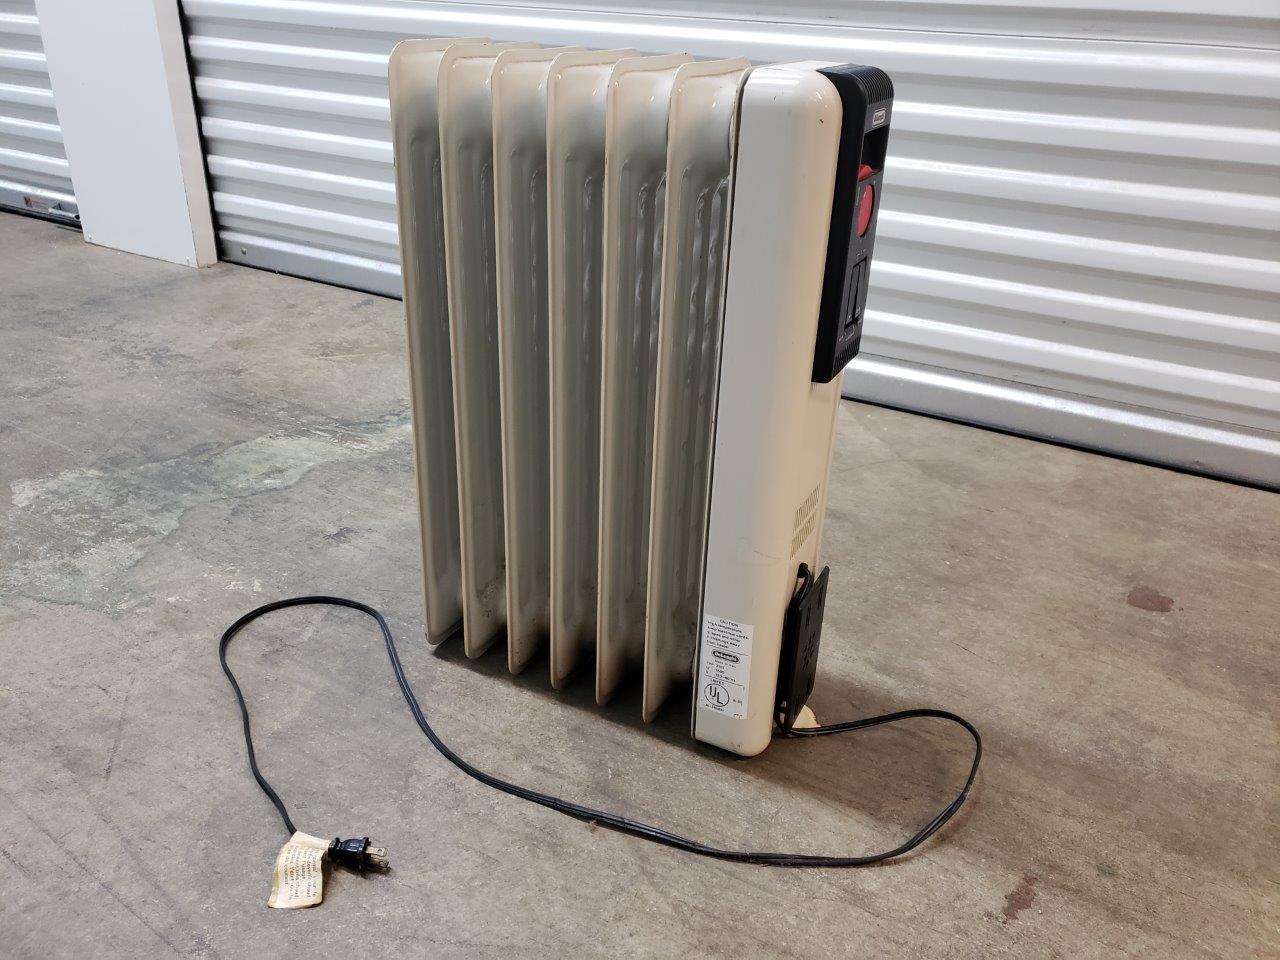 DeLonghi Type 3107 Electric 1500W Portable Radiator /Oil Filled Space